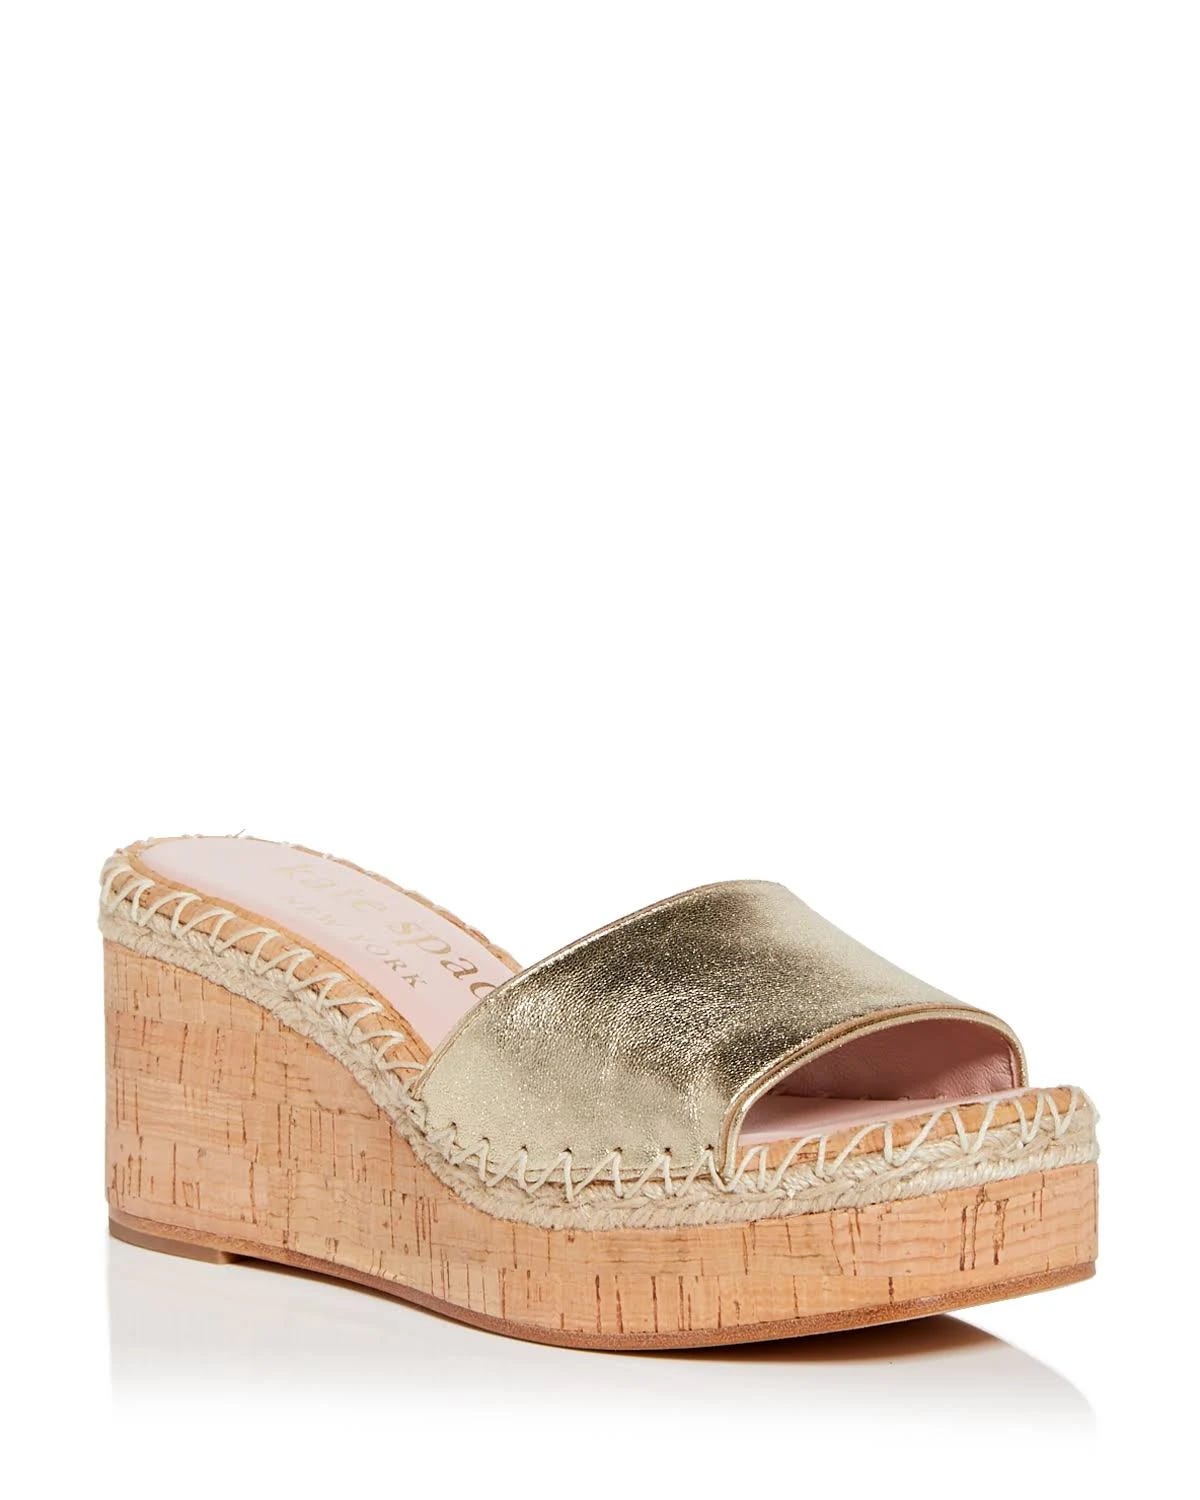 Kate Spade Gold Metallic Espadrille Wedge Sandals with Leather Lining | Image